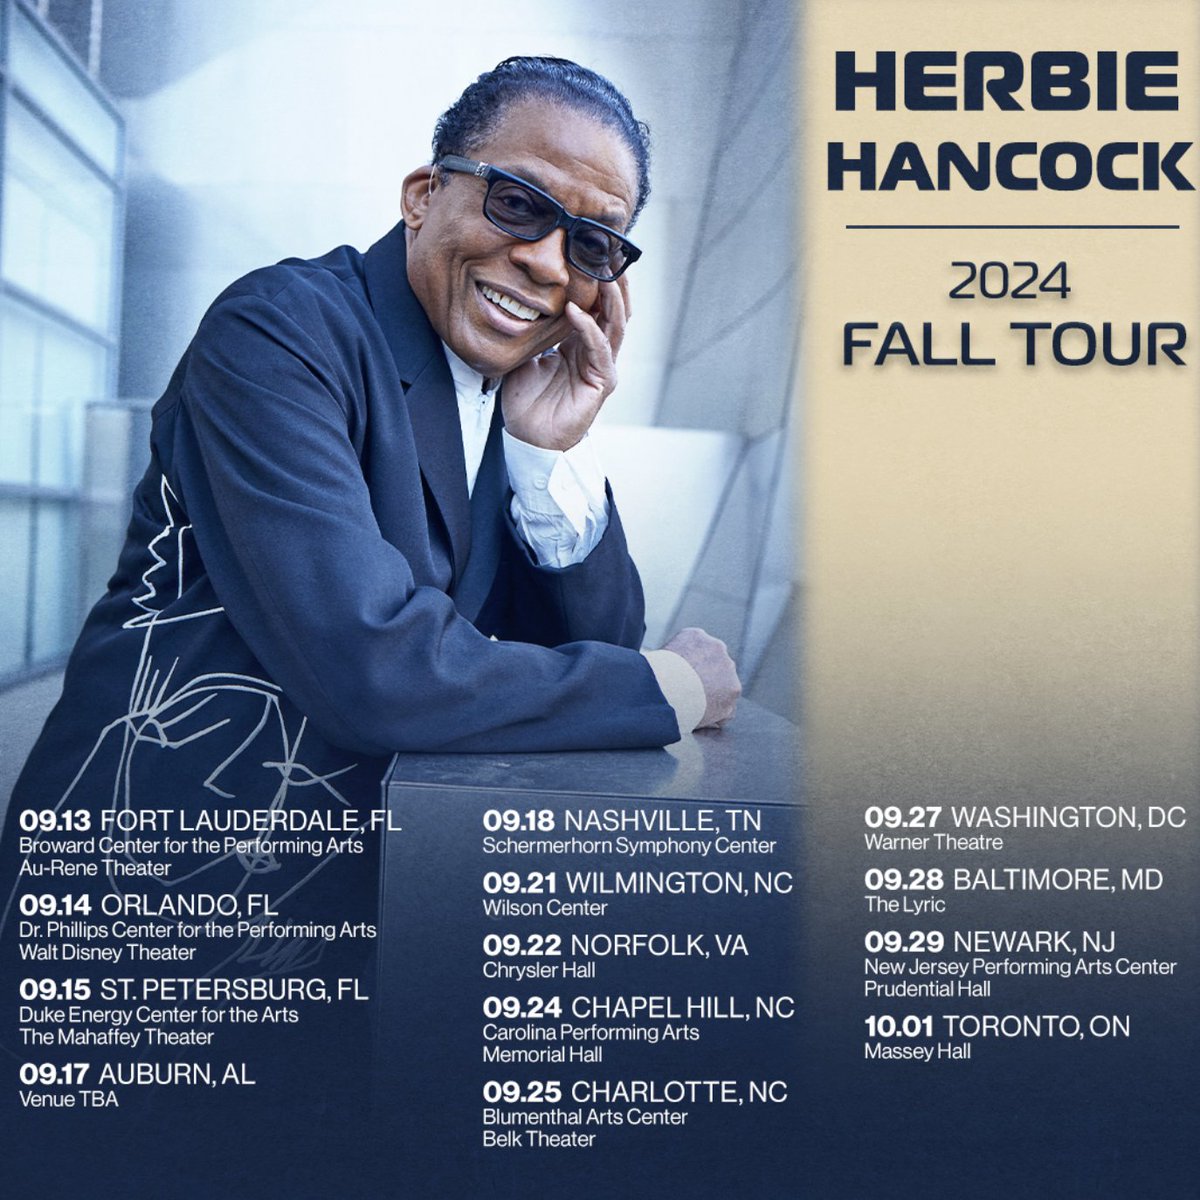 We’re running it back in the fall! Come join Herbie and his band for an otherworldly show this September (and October for you, Toronto). Tickets for most markets go on sale this Friday. For tickets and information, go to herbiehancock.com/tour